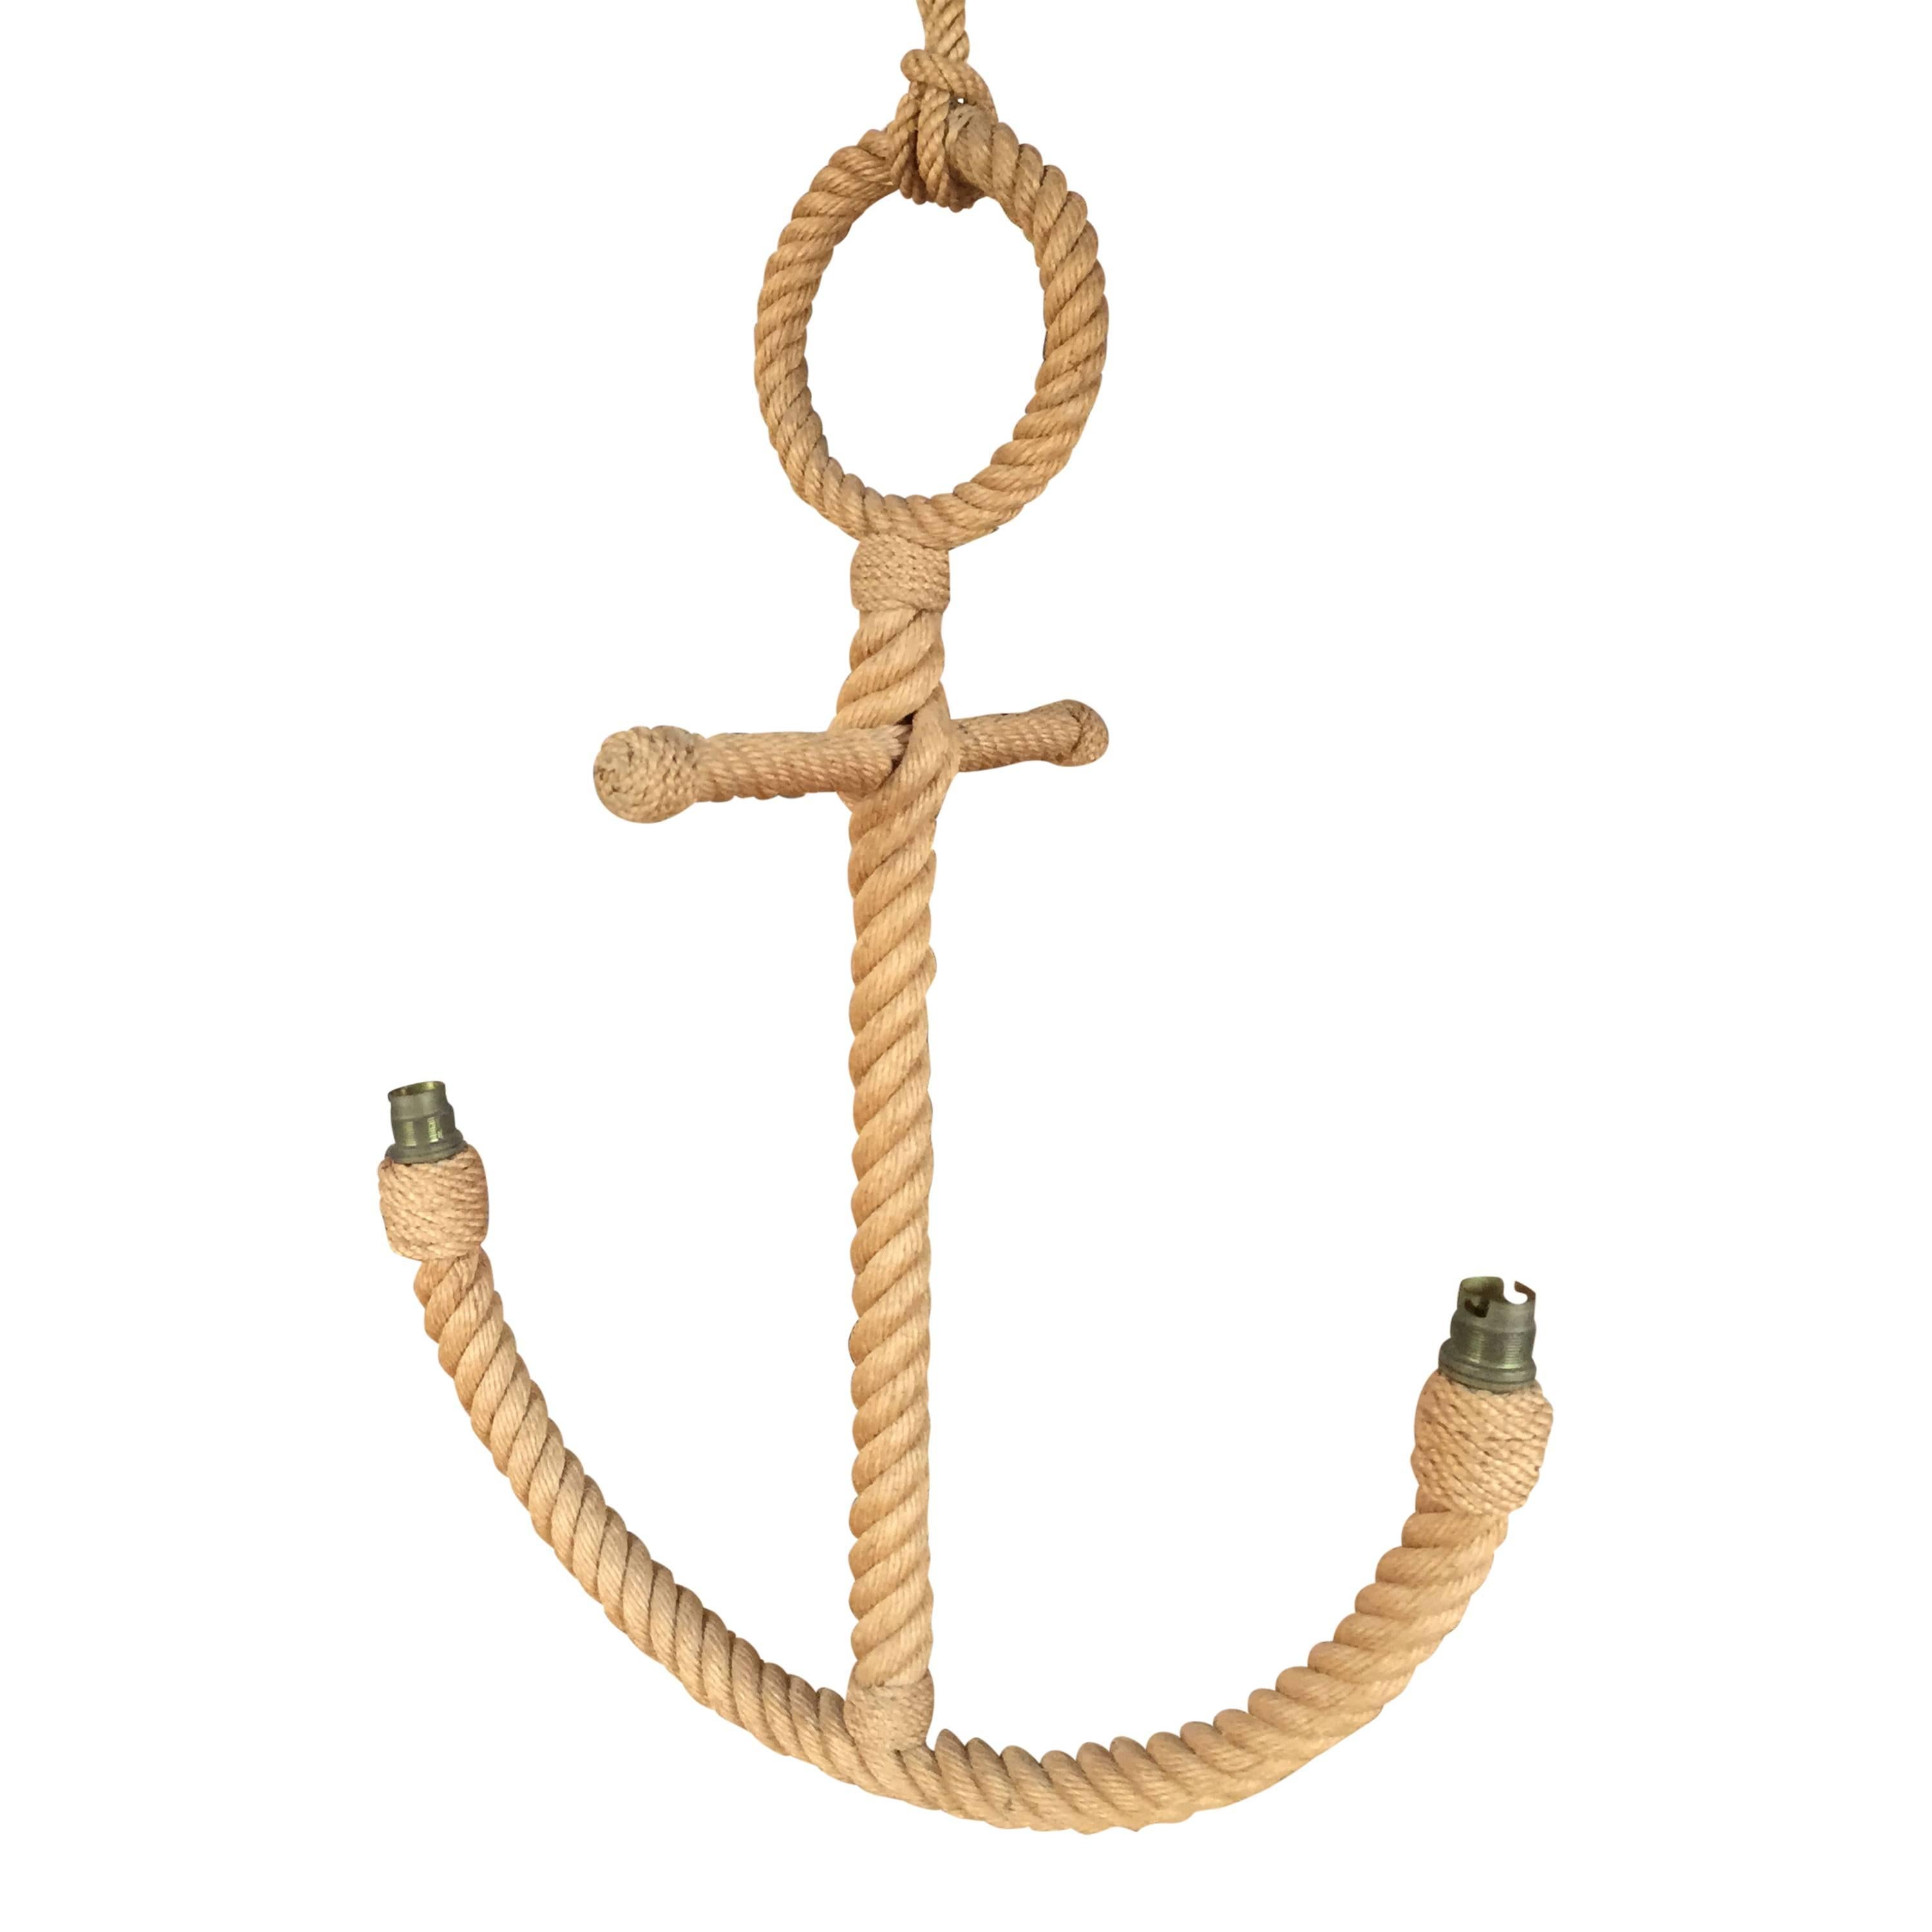 Large rope pendant by Audoux Minet.

European socket and wiring.